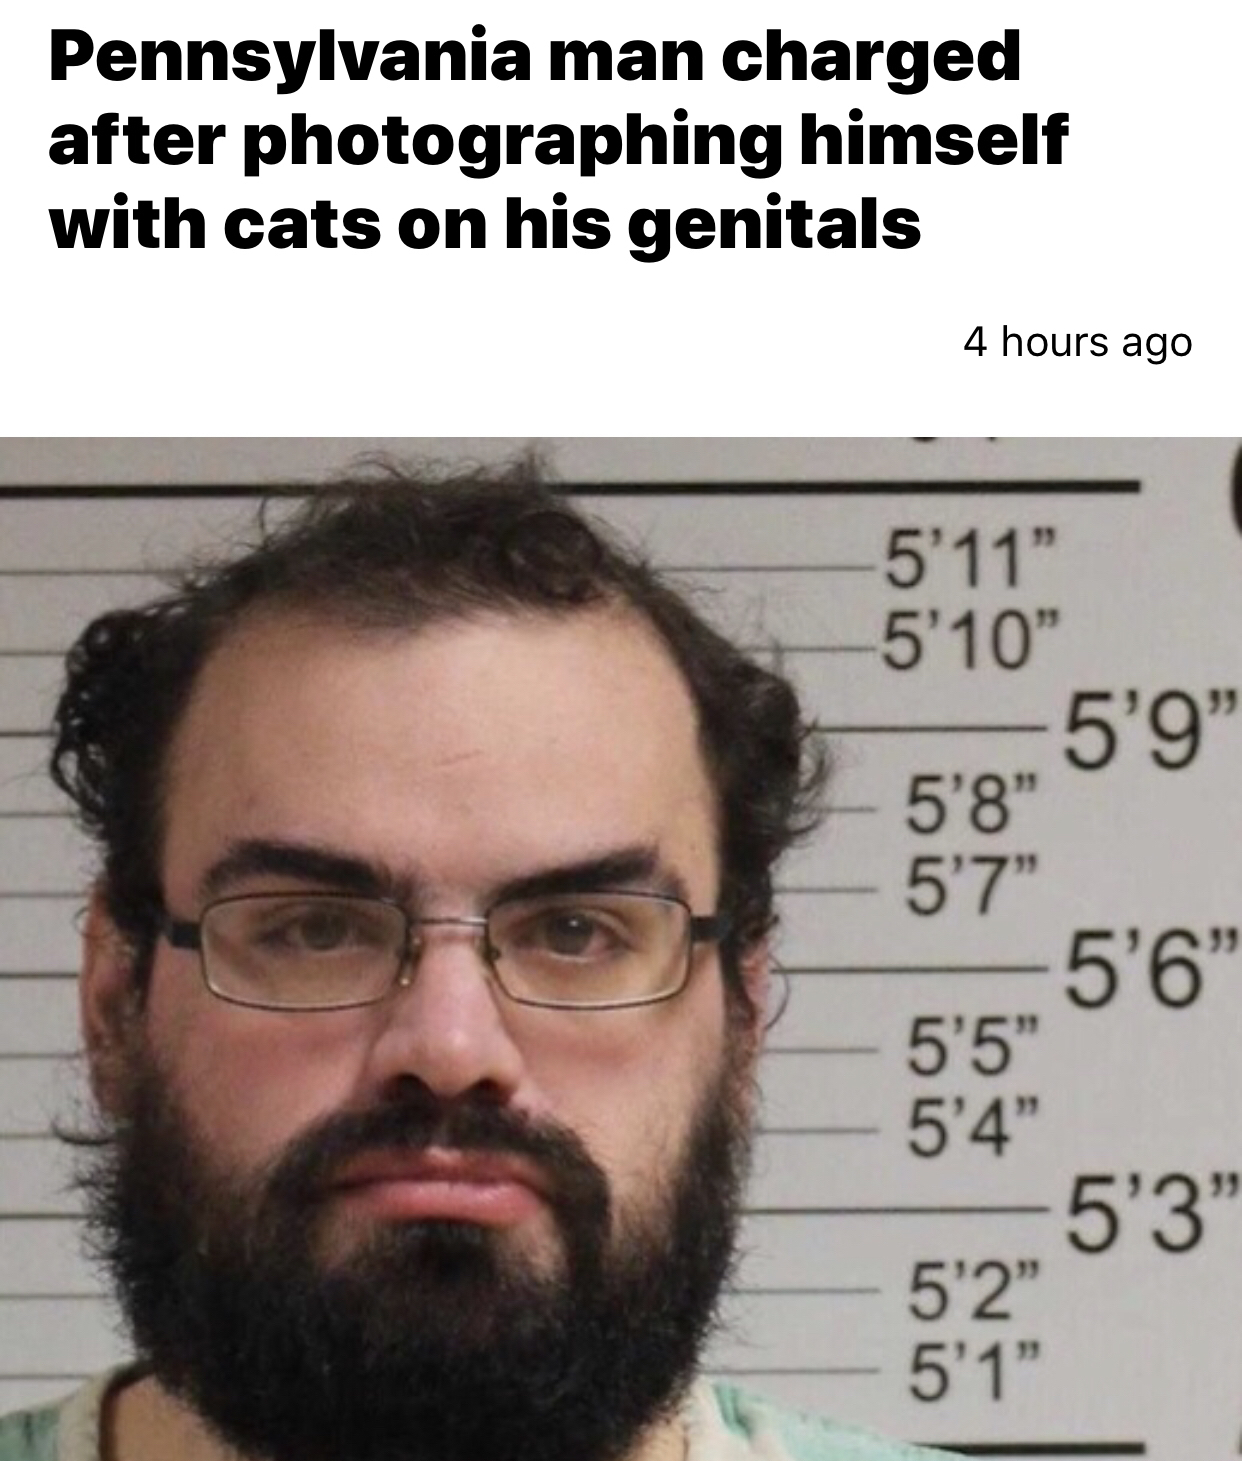 florida man 5 5 - Pennsylvania man charged after photographing himself with cats on his genitals 4 hours ago 5'11" 5'10" | 5'8" 55" 54 5'2" 5'1"